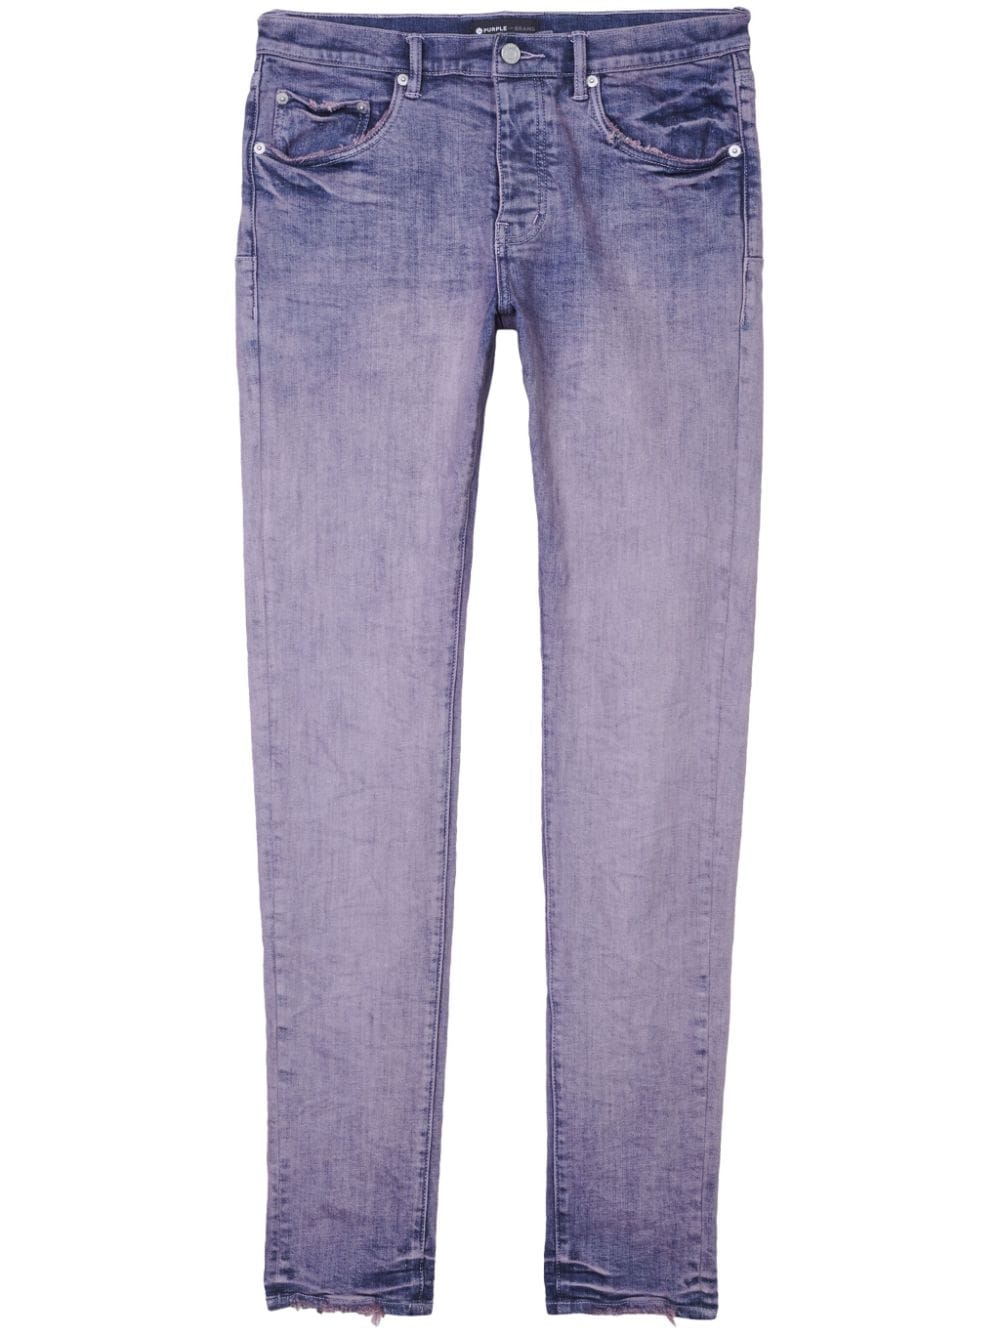 P001 low-rise skinny jeans